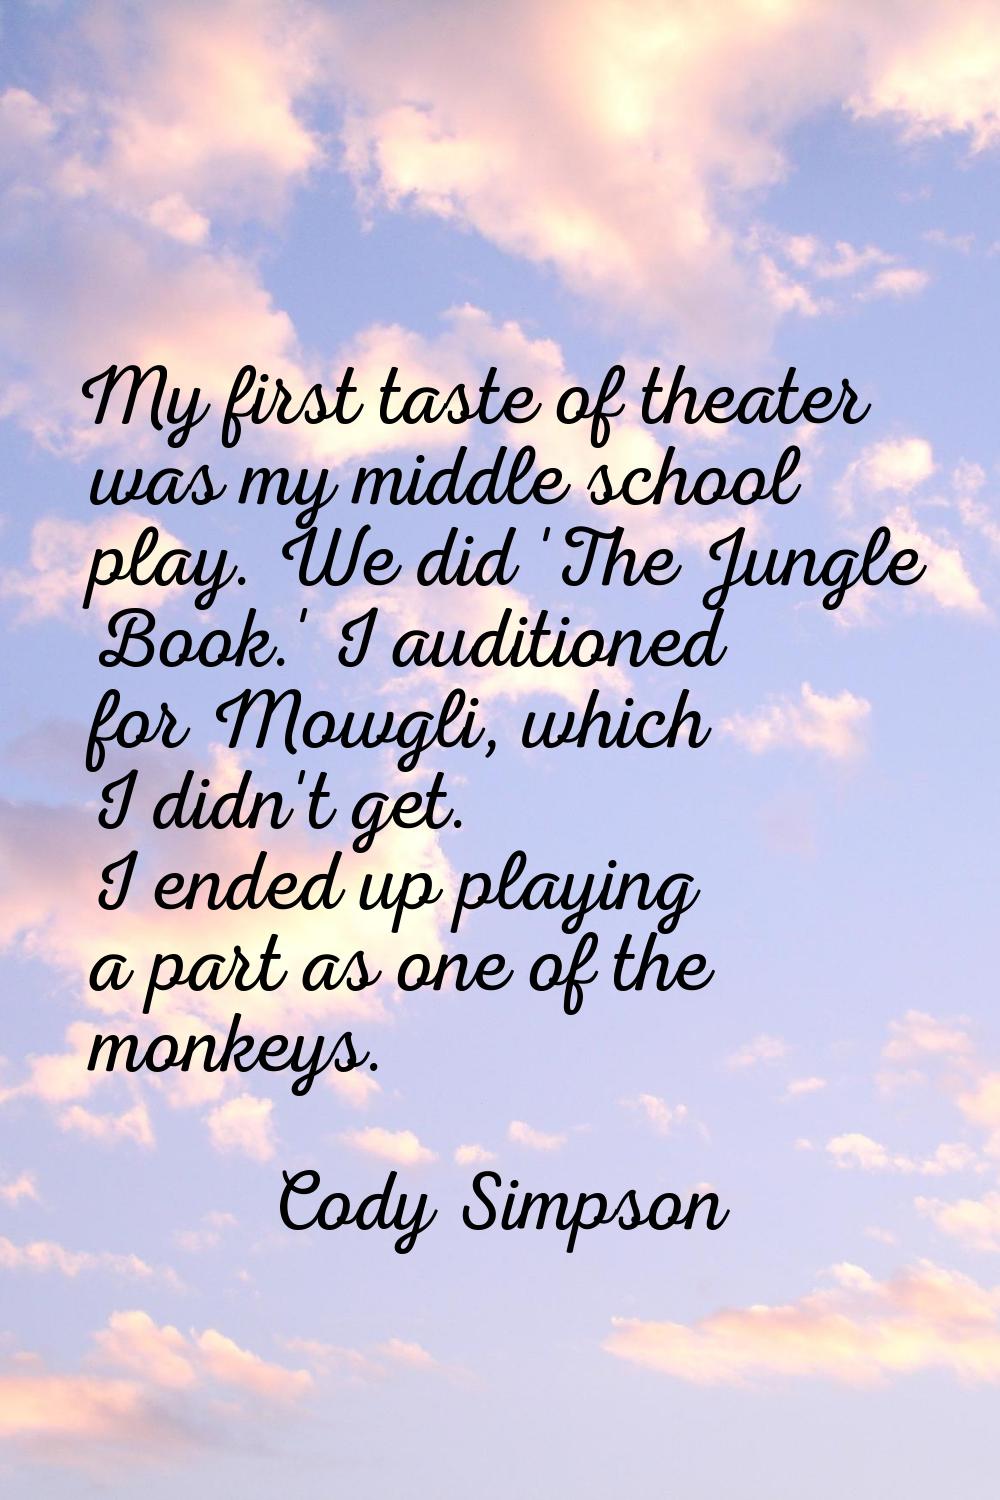 My first taste of theater was my middle school play. We did 'The Jungle Book.' I auditioned for Mow